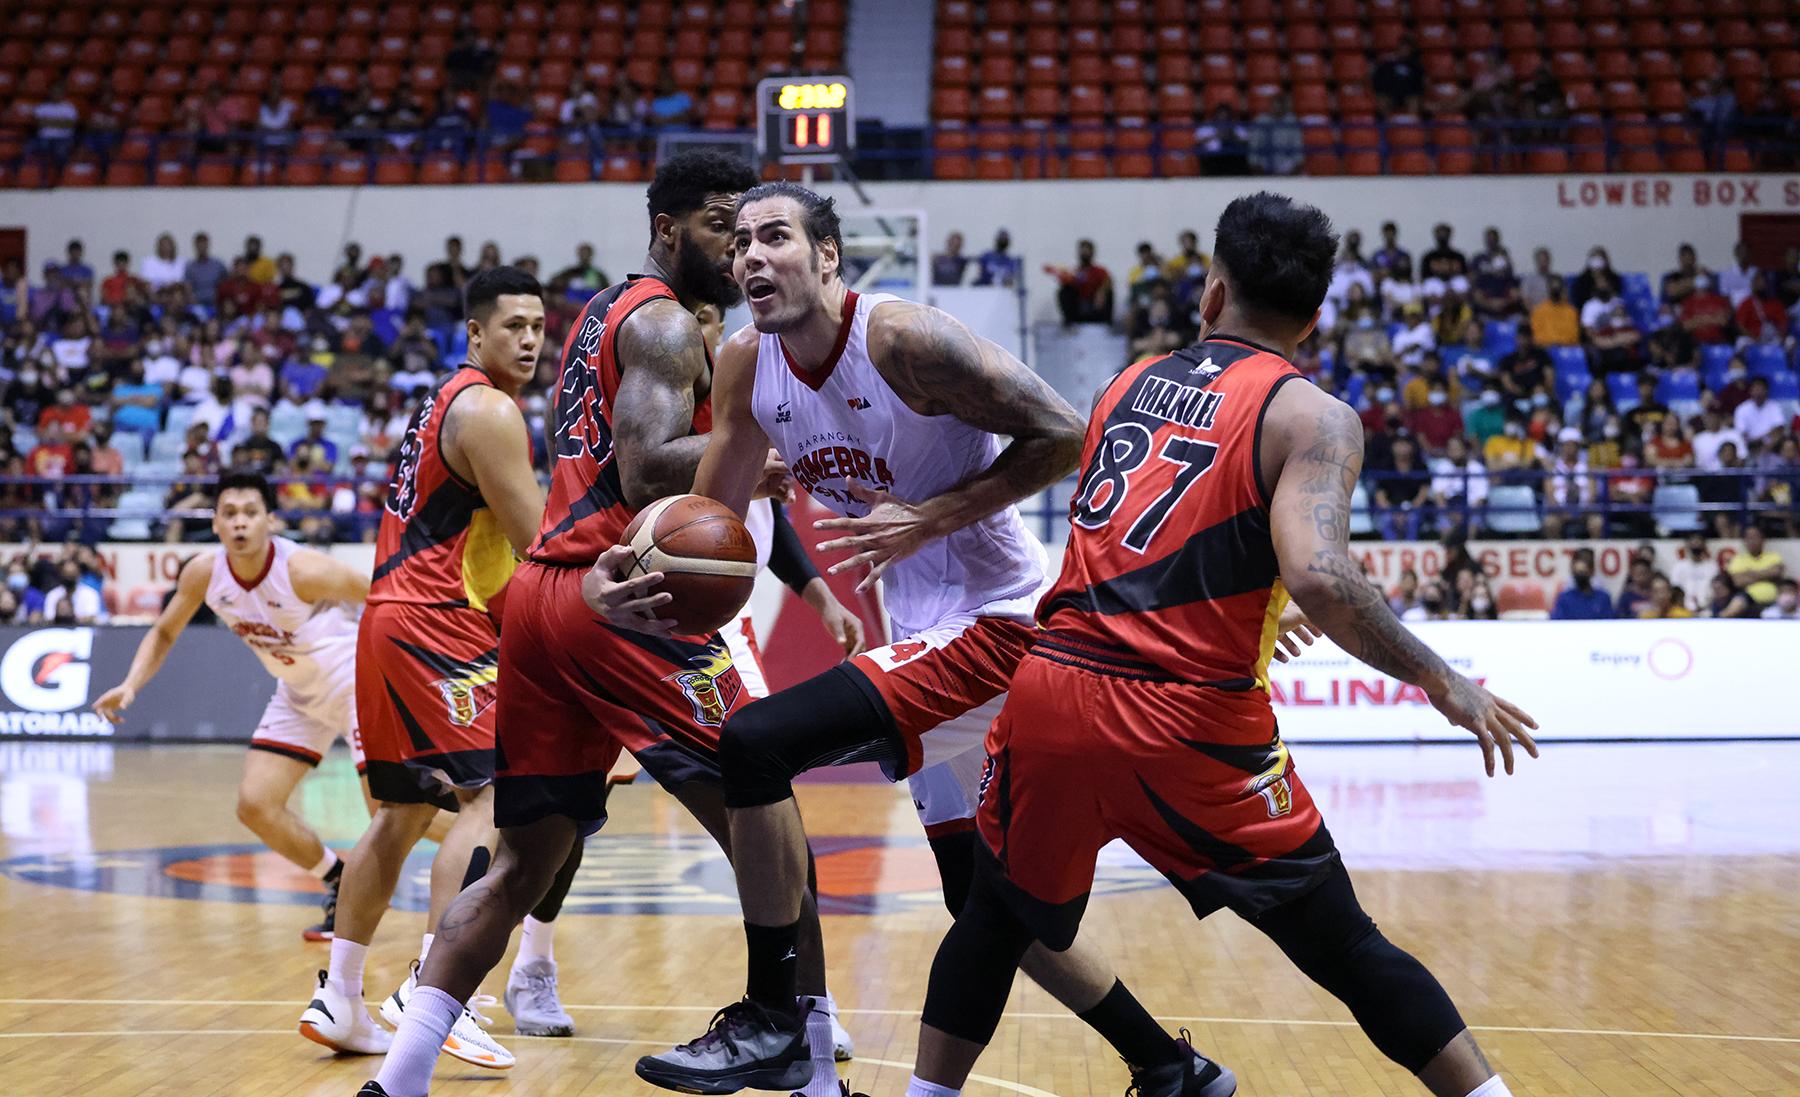 Ginebra weathers SMB's fourth quarter rally to take Game 1 in semis series